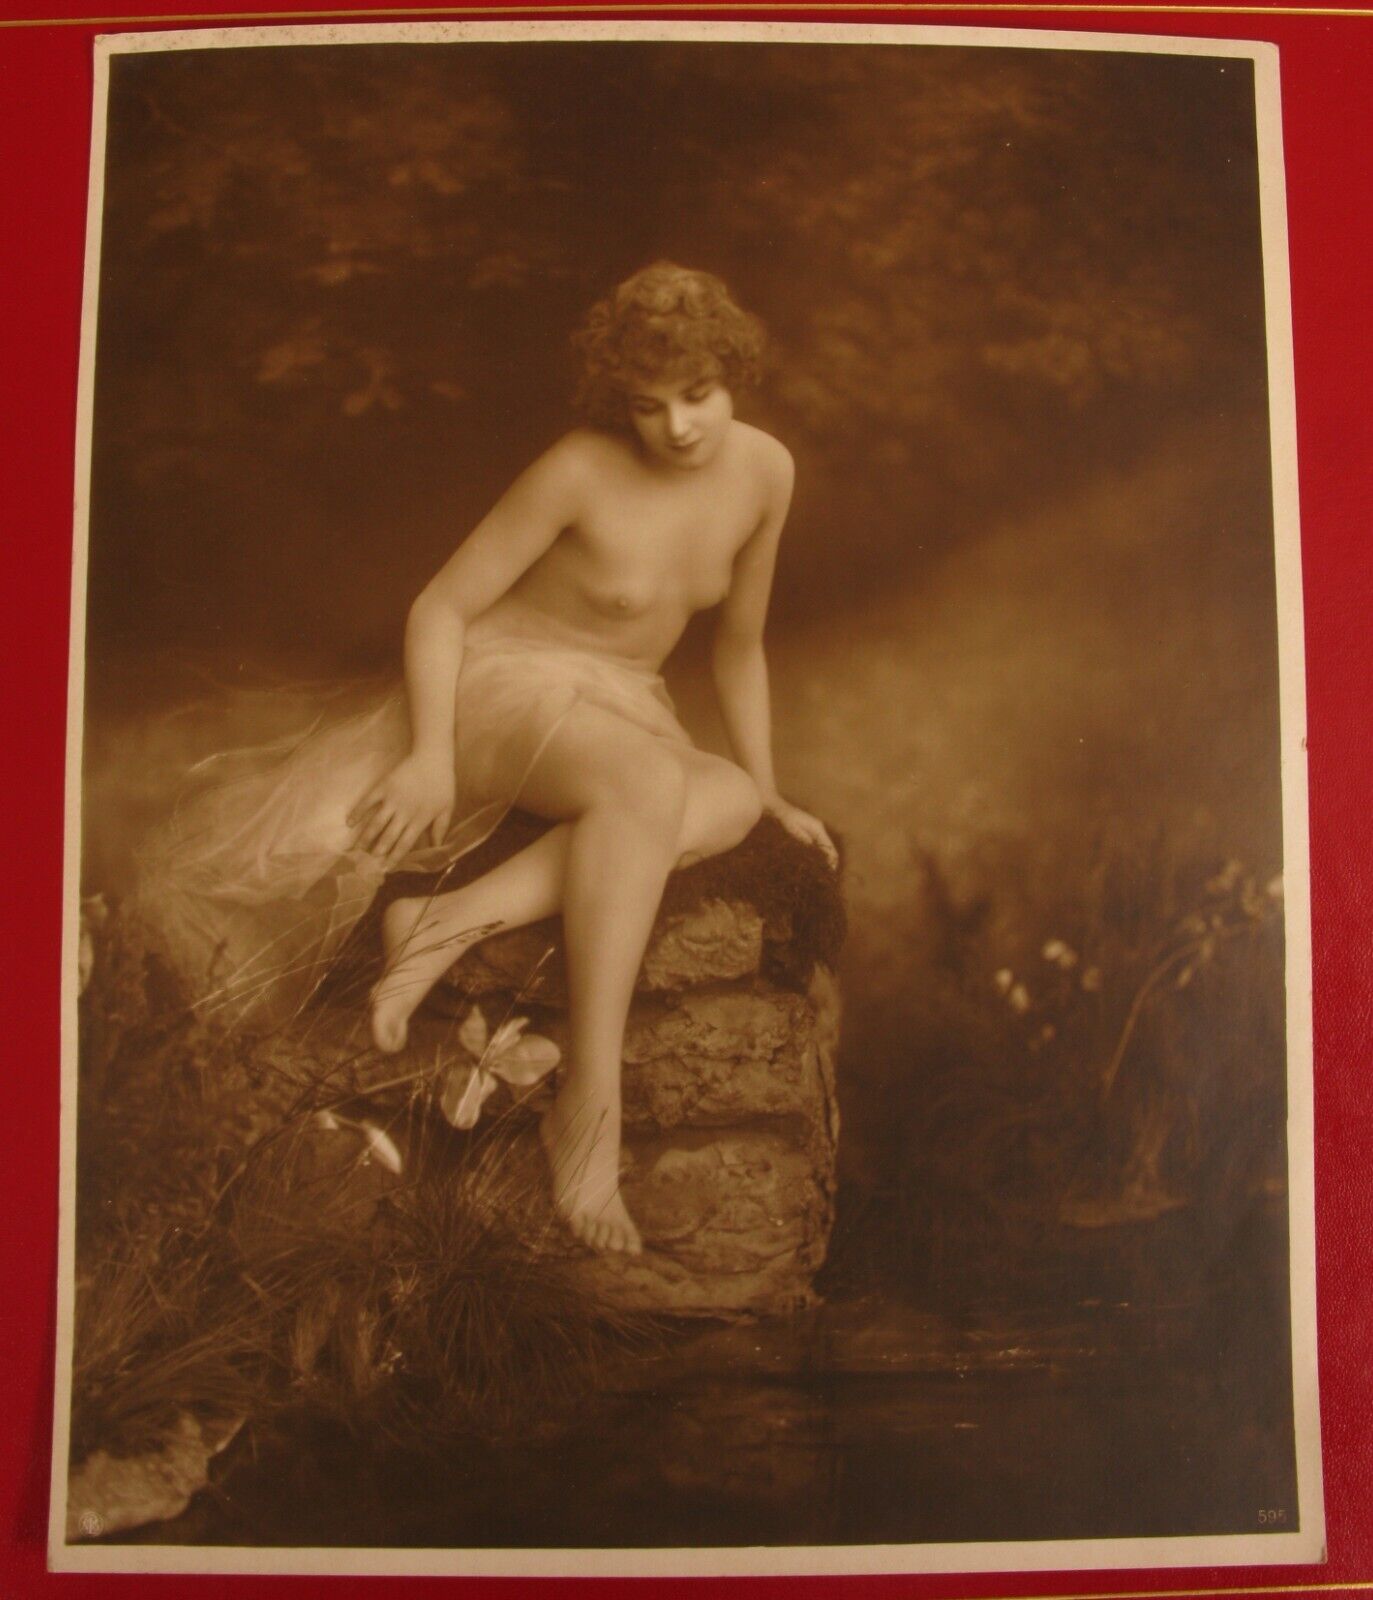 VINTAGE 1920's OVERSIZED PHOTOGRAPH FEMALE SEXY NYMPH SENSUAL RISQUE NPG 